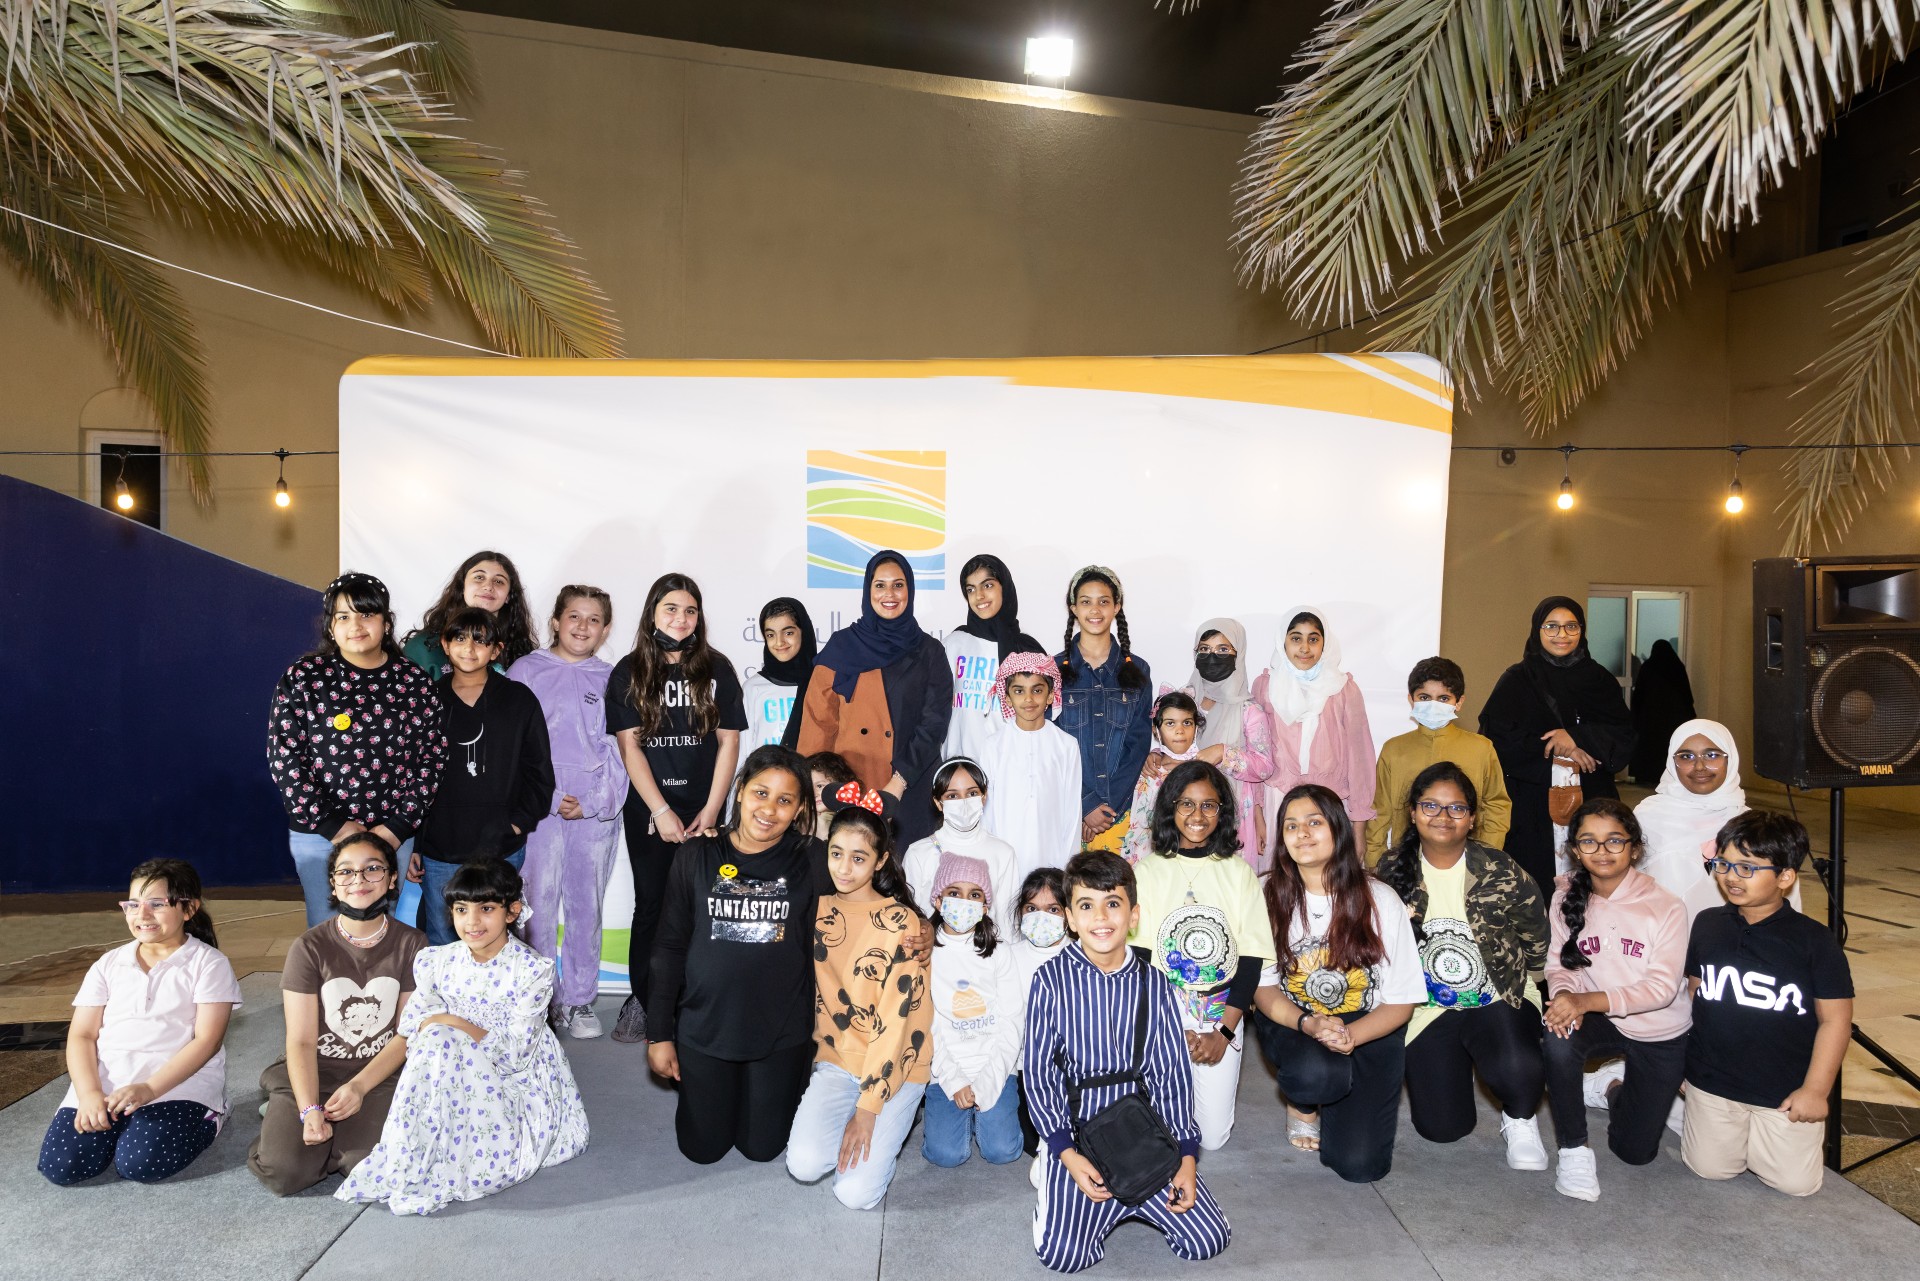 Young Entrepreneurs Exhibition concludes its first session at “Sharjah Ladies Club” with 15 participating innovative entrepreneurial projects